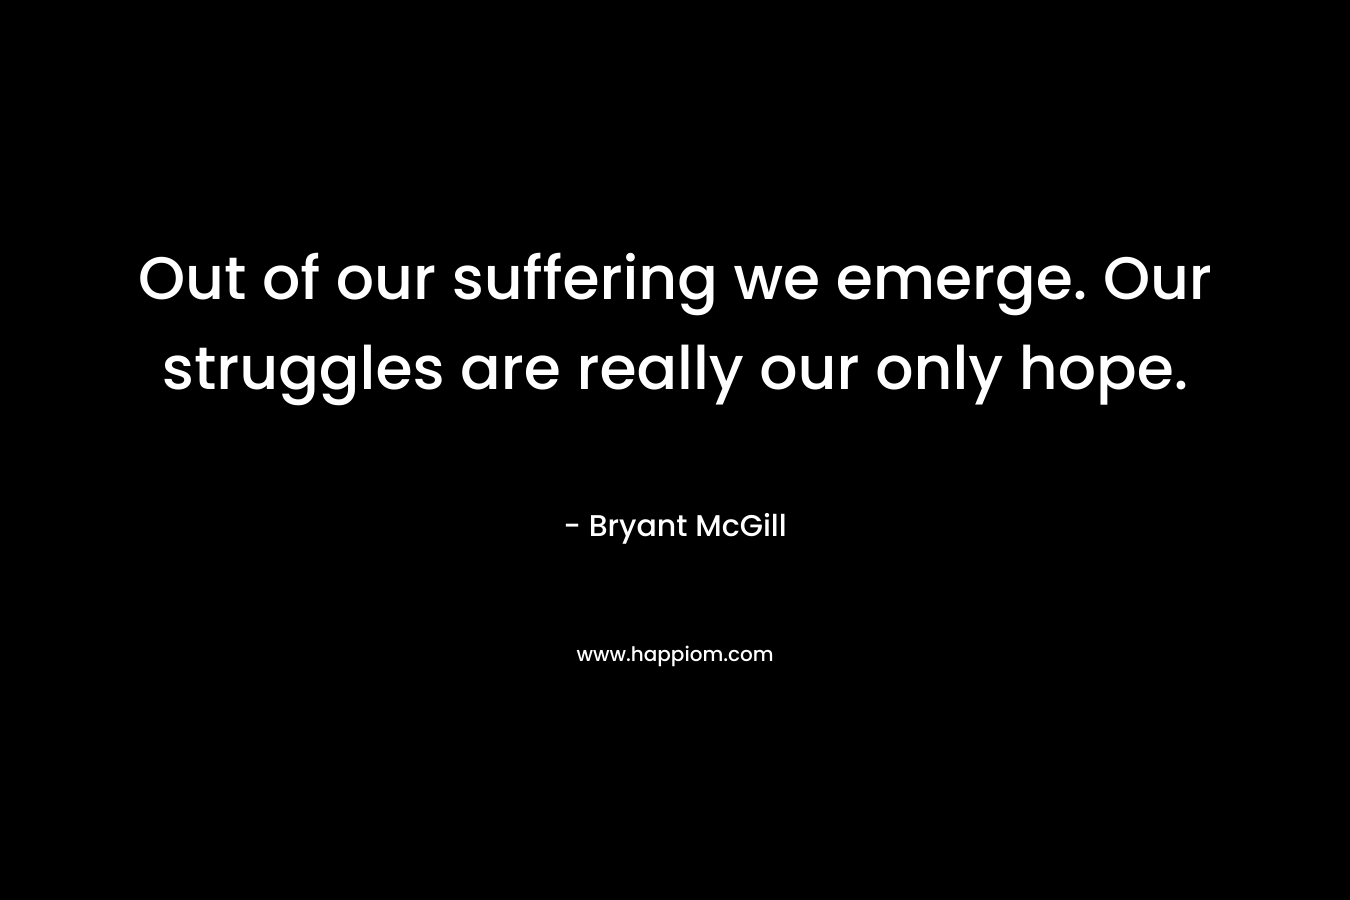 Out of our suffering we emerge. Our struggles are really our only hope. – Bryant McGill